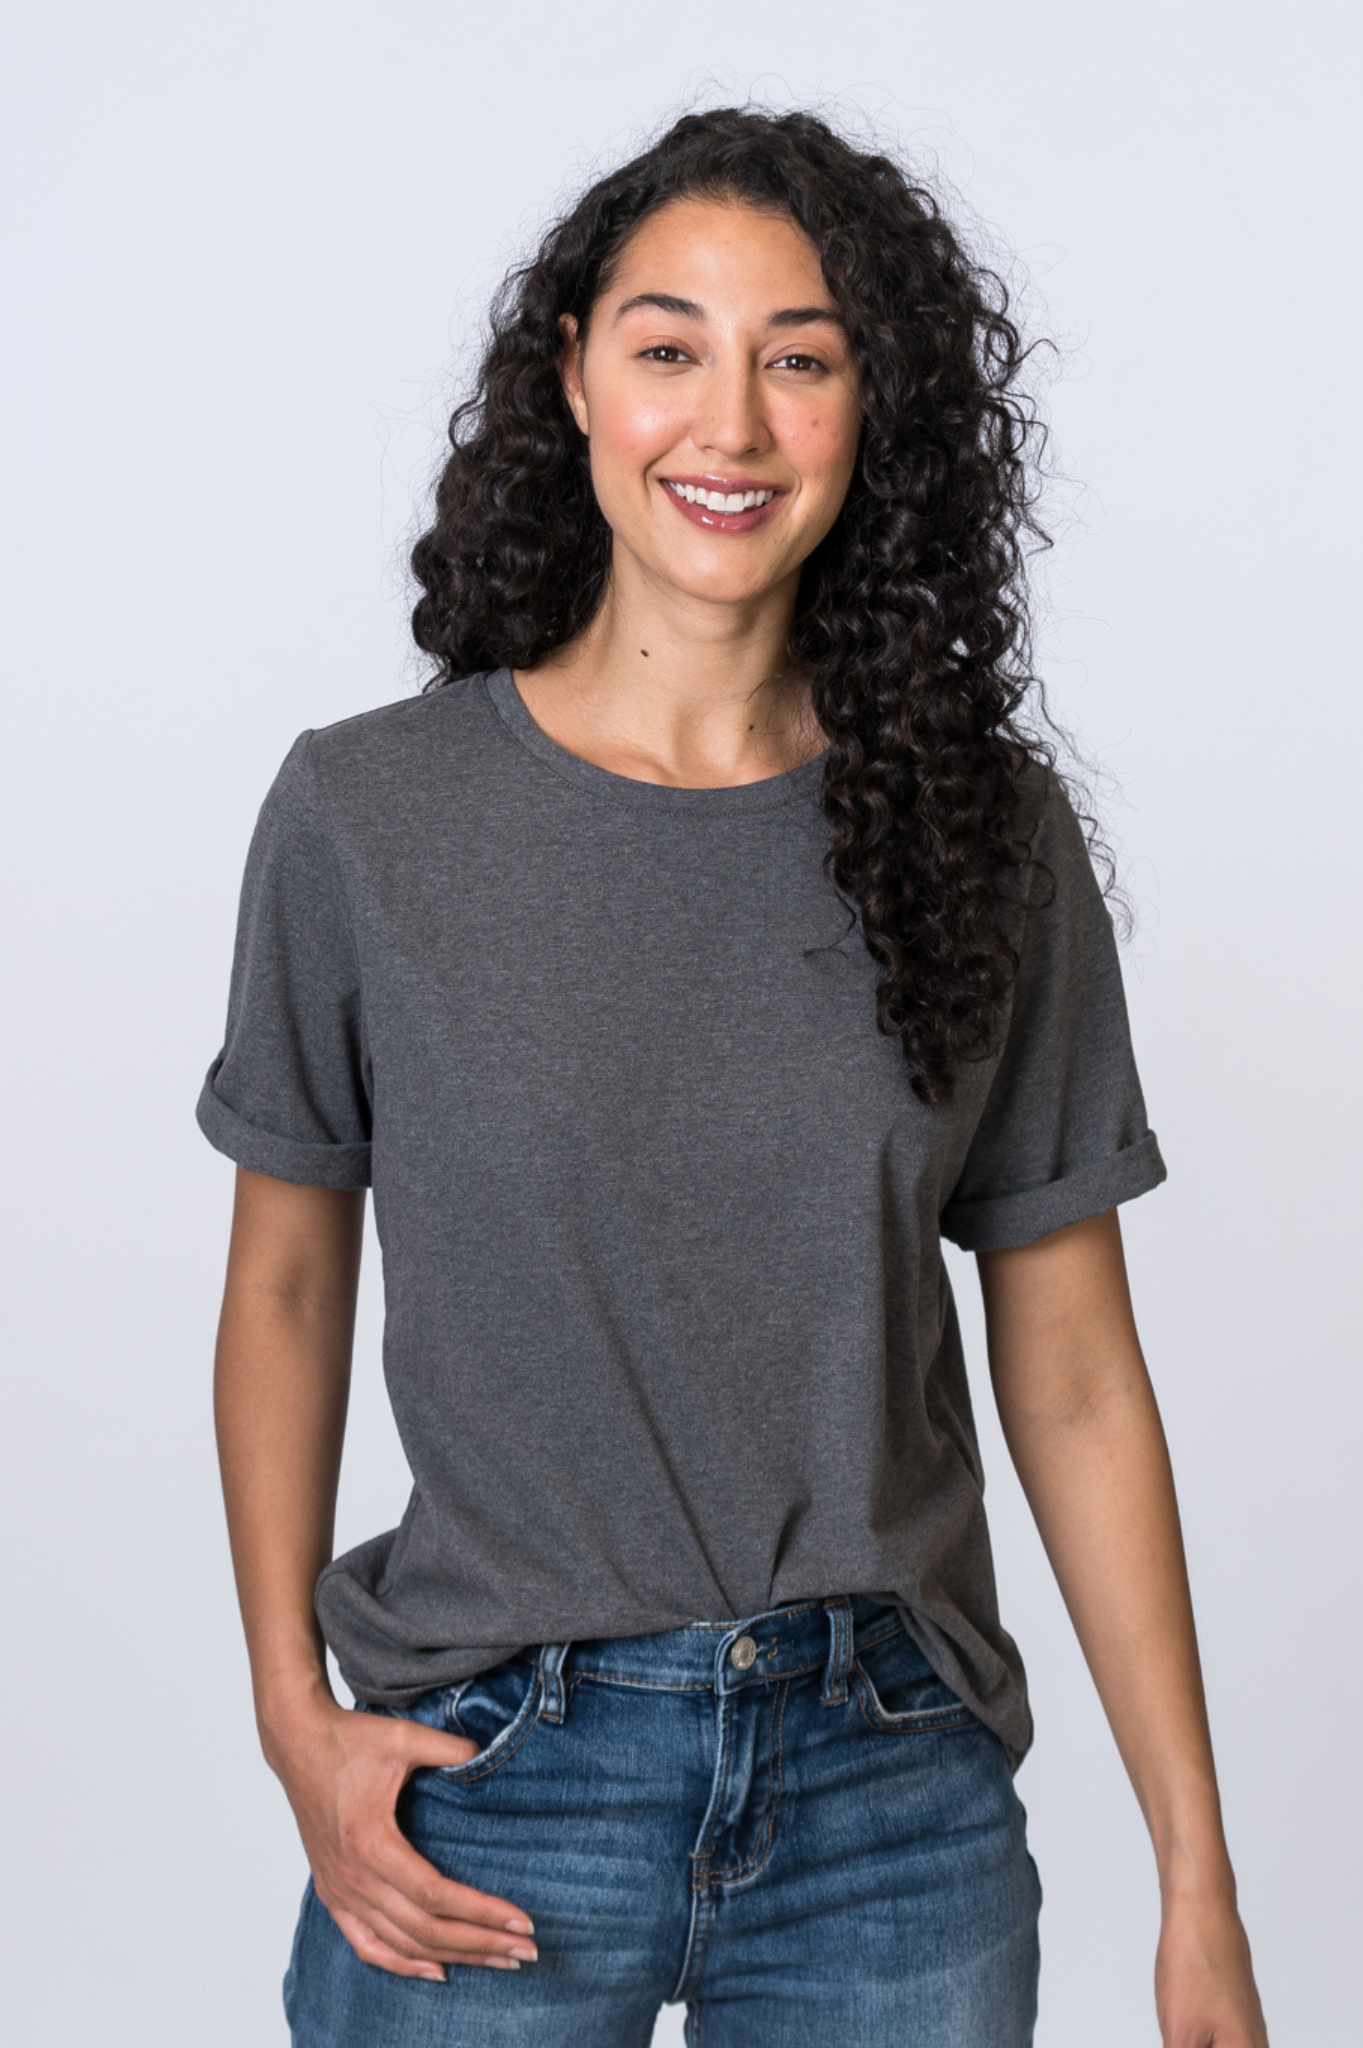 Woman smiling, wearing a dark gray, cuffed sleeve short sleeve top tucked into medium wash jeans. Front of clothing is being shown